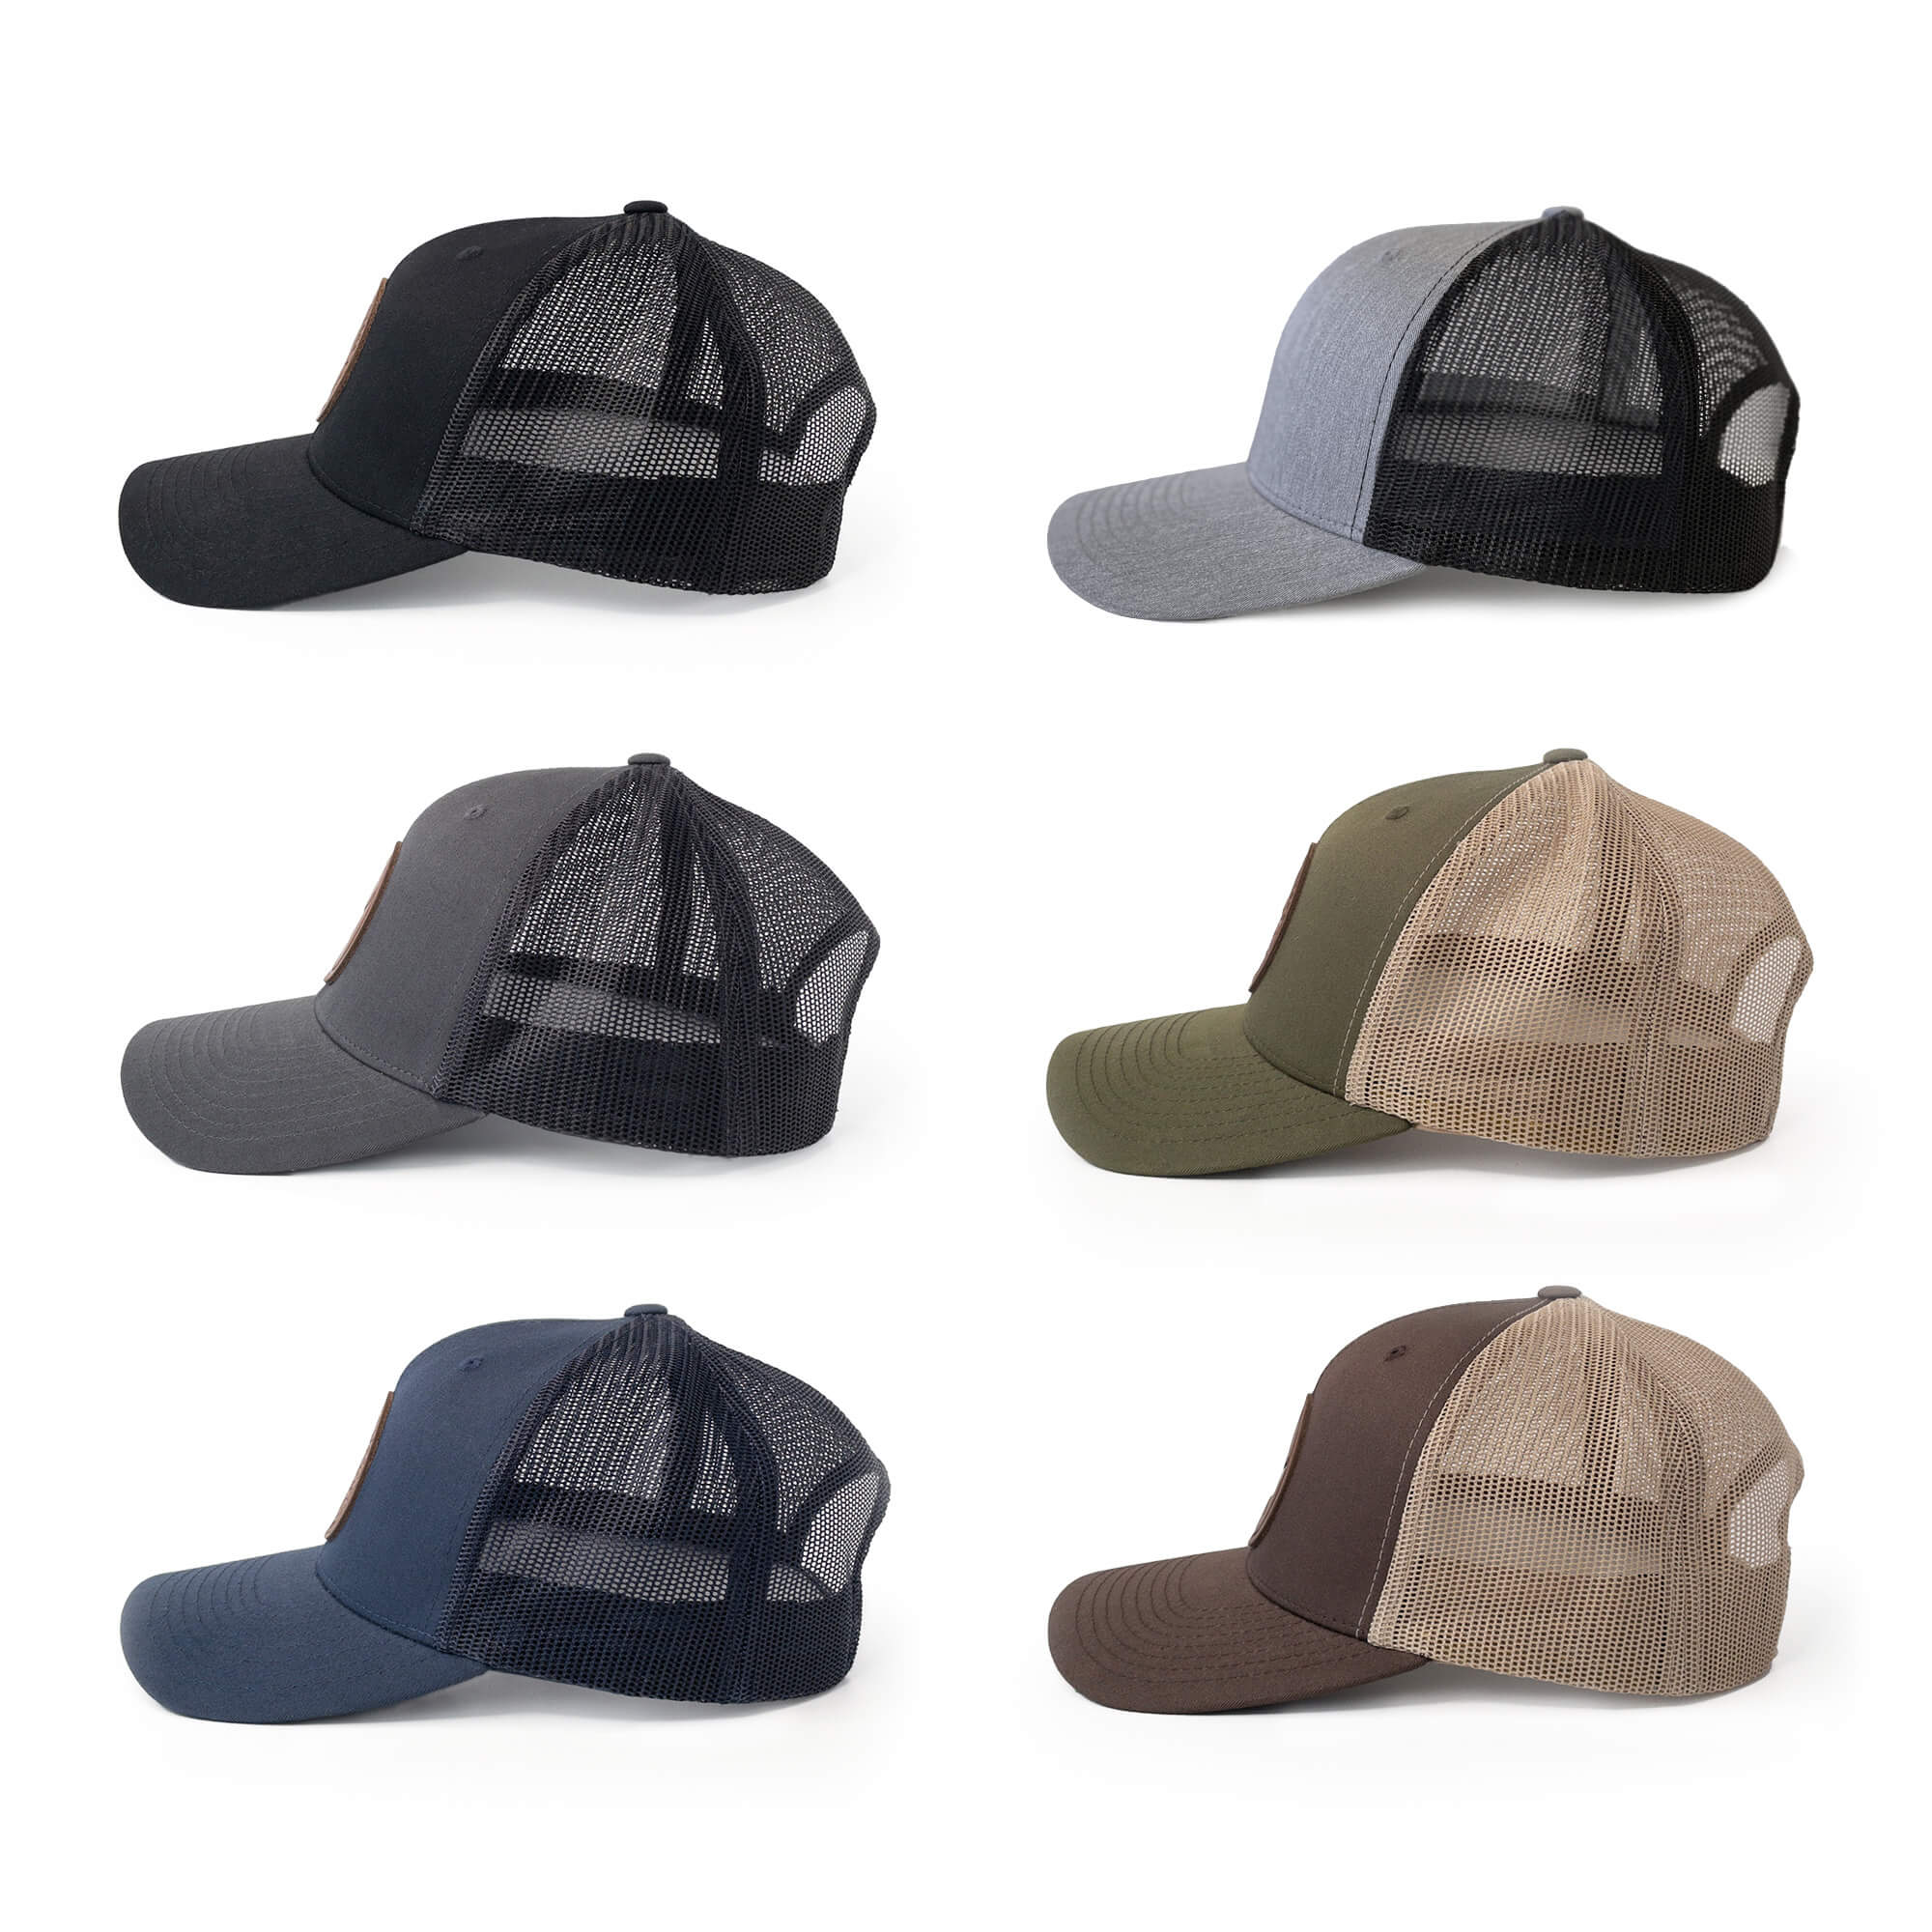 Leather patch trucker hats available in 6 colors | BLACK-004-004, CHARC-004-004, NAVY-004-004, HGREY-004-004, MOSS-004-004, BROWN-004-004